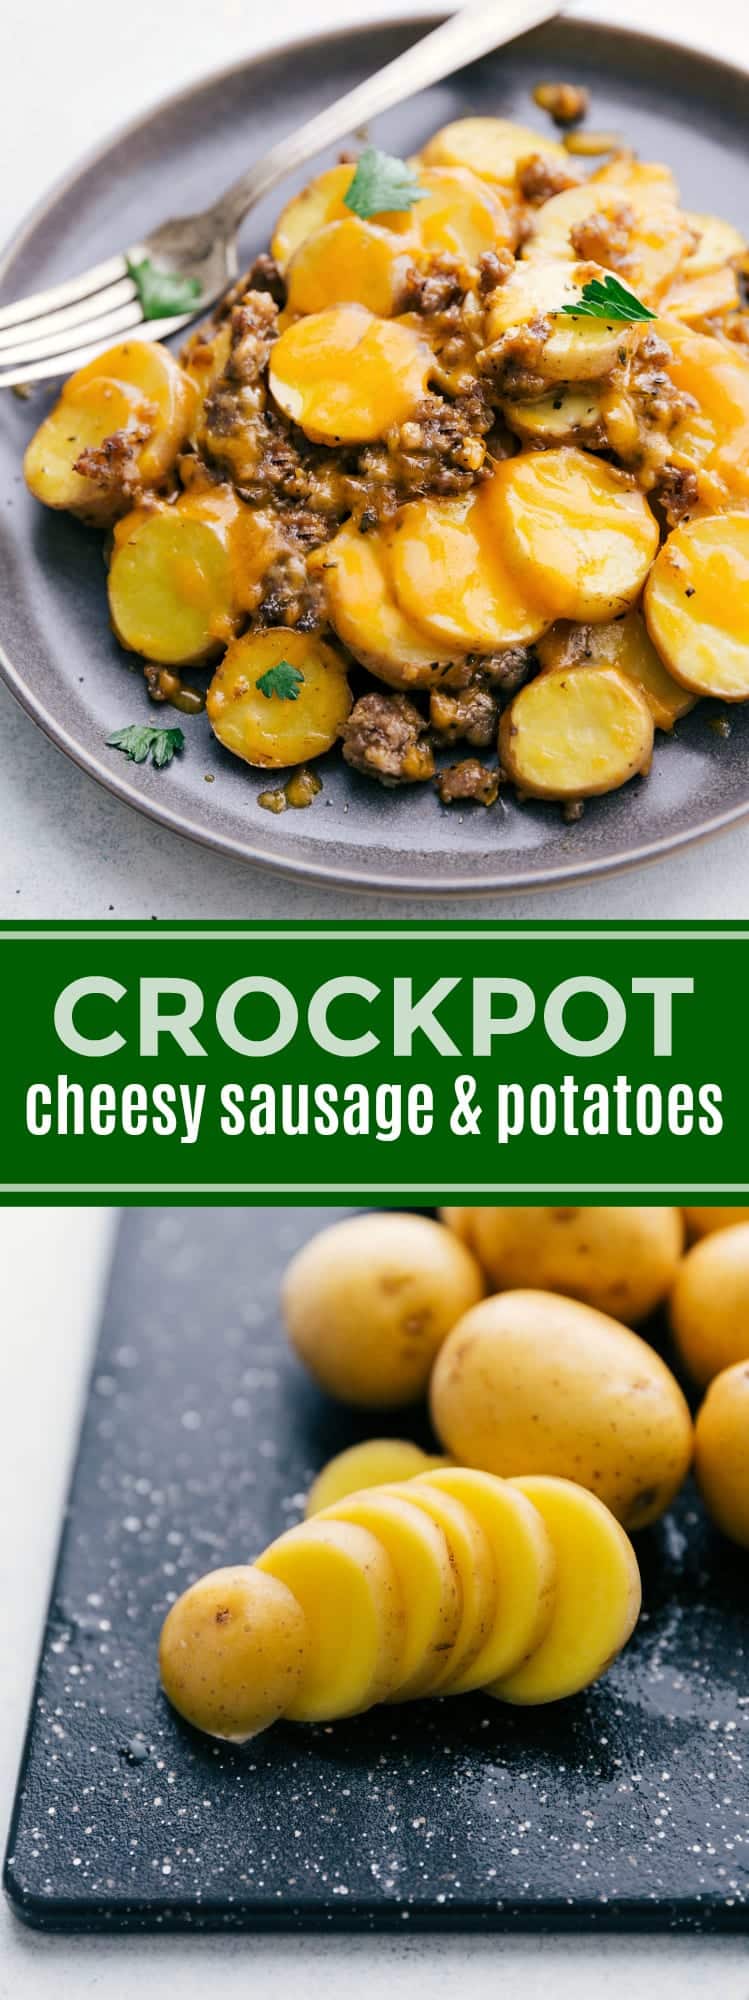 TSimple and delicious comfort food: crockpot cheesy potatoes and sausage! The potatoes and sausage are cooked in the crockpot until tender and flavorful and then covered in plenty of cheese via chelseasmessyapron.com #crockpot #slowcooker #cheese #cheesy #potatoes #sausage #easy #kidfriendly